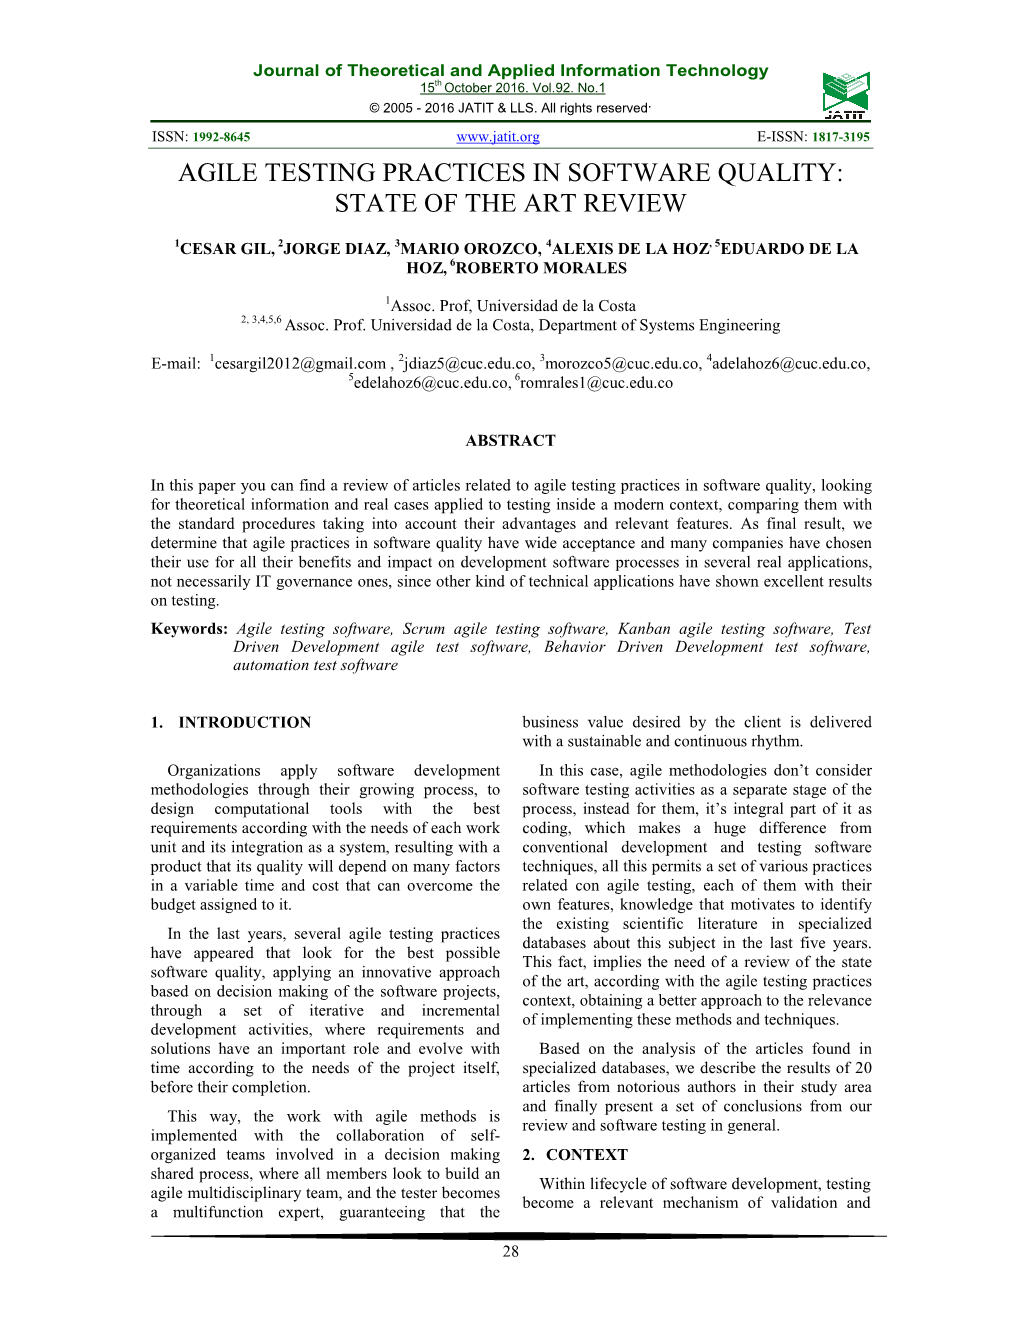 Agile Testing Practices in Software Quality: State of the Art Review